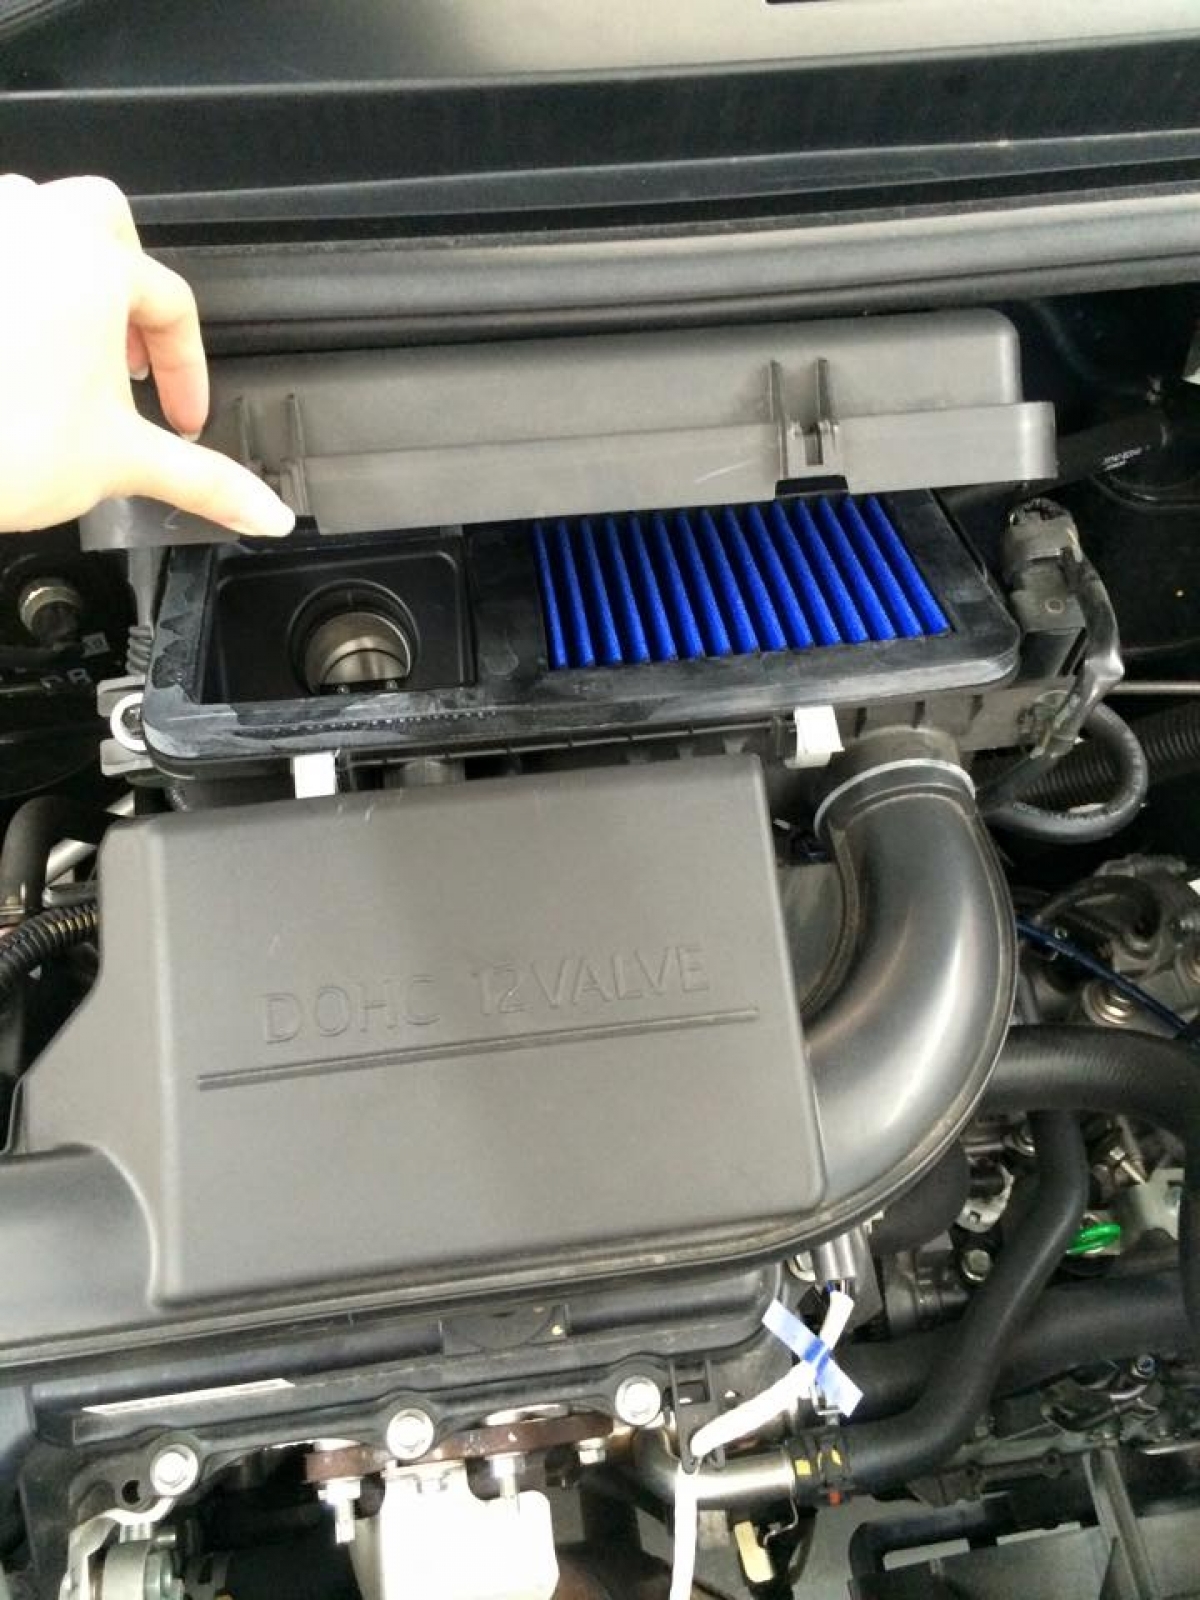 Works Air Filter - Perodua Axia 1.0 '14-on (first model 